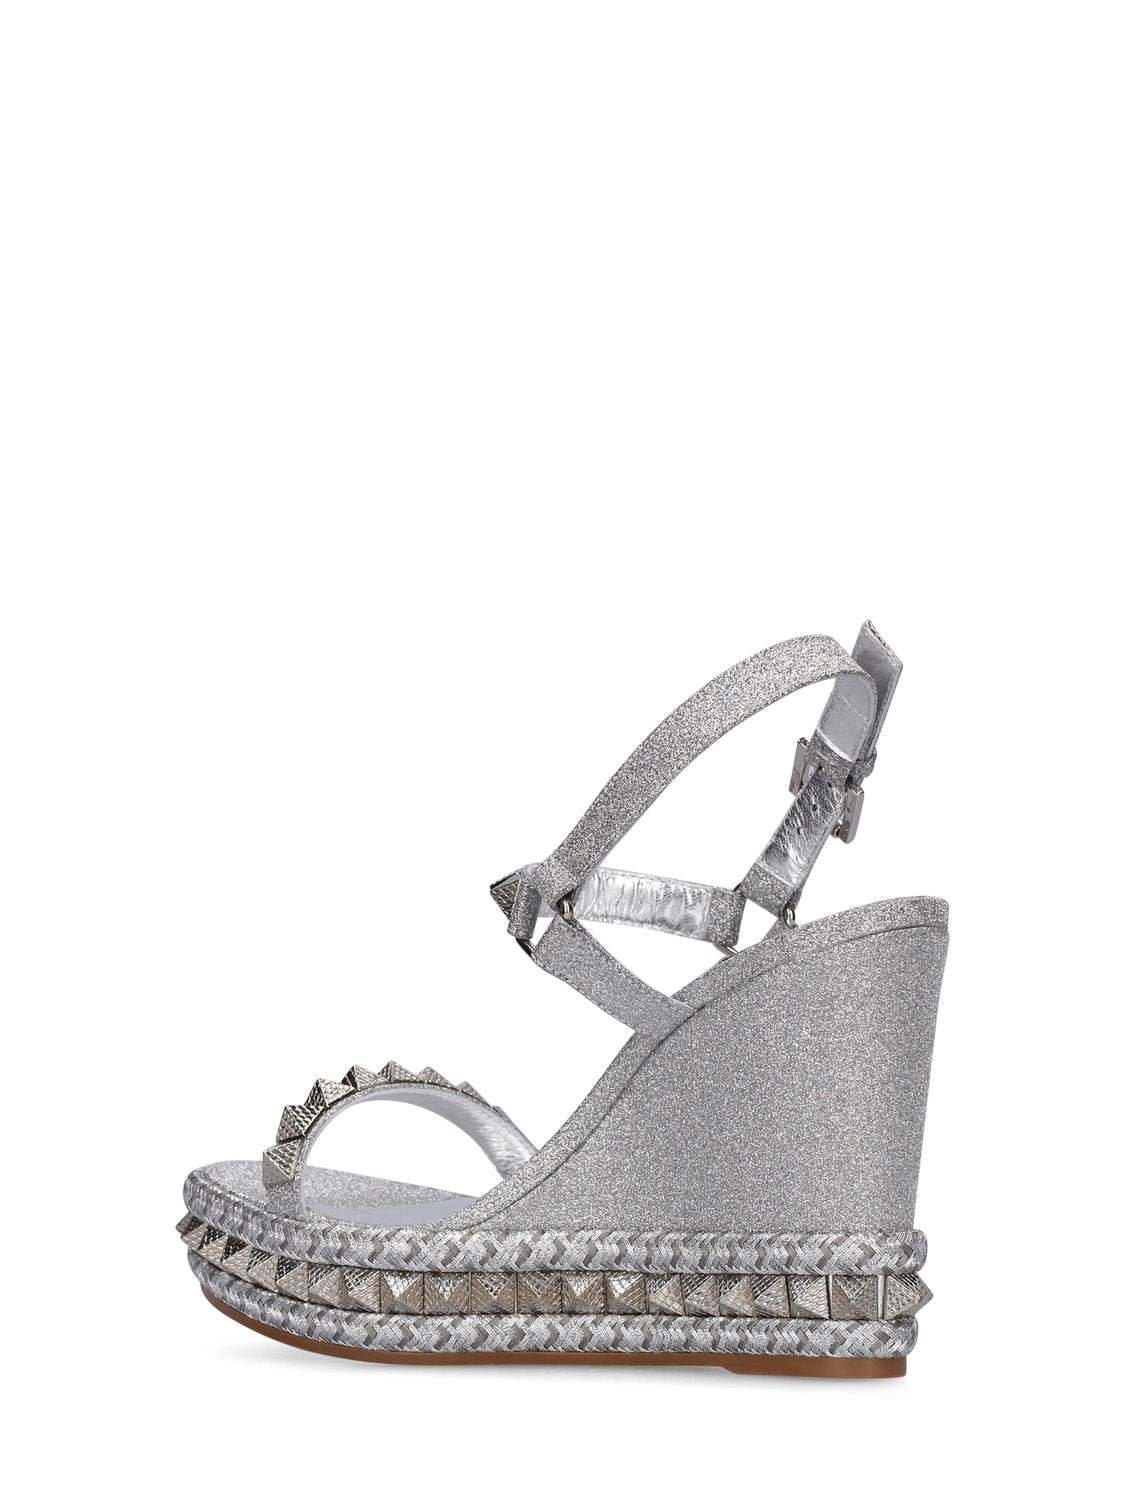 Pyraclou Embellished Leather Sandals in Silver - Christian Louboutin